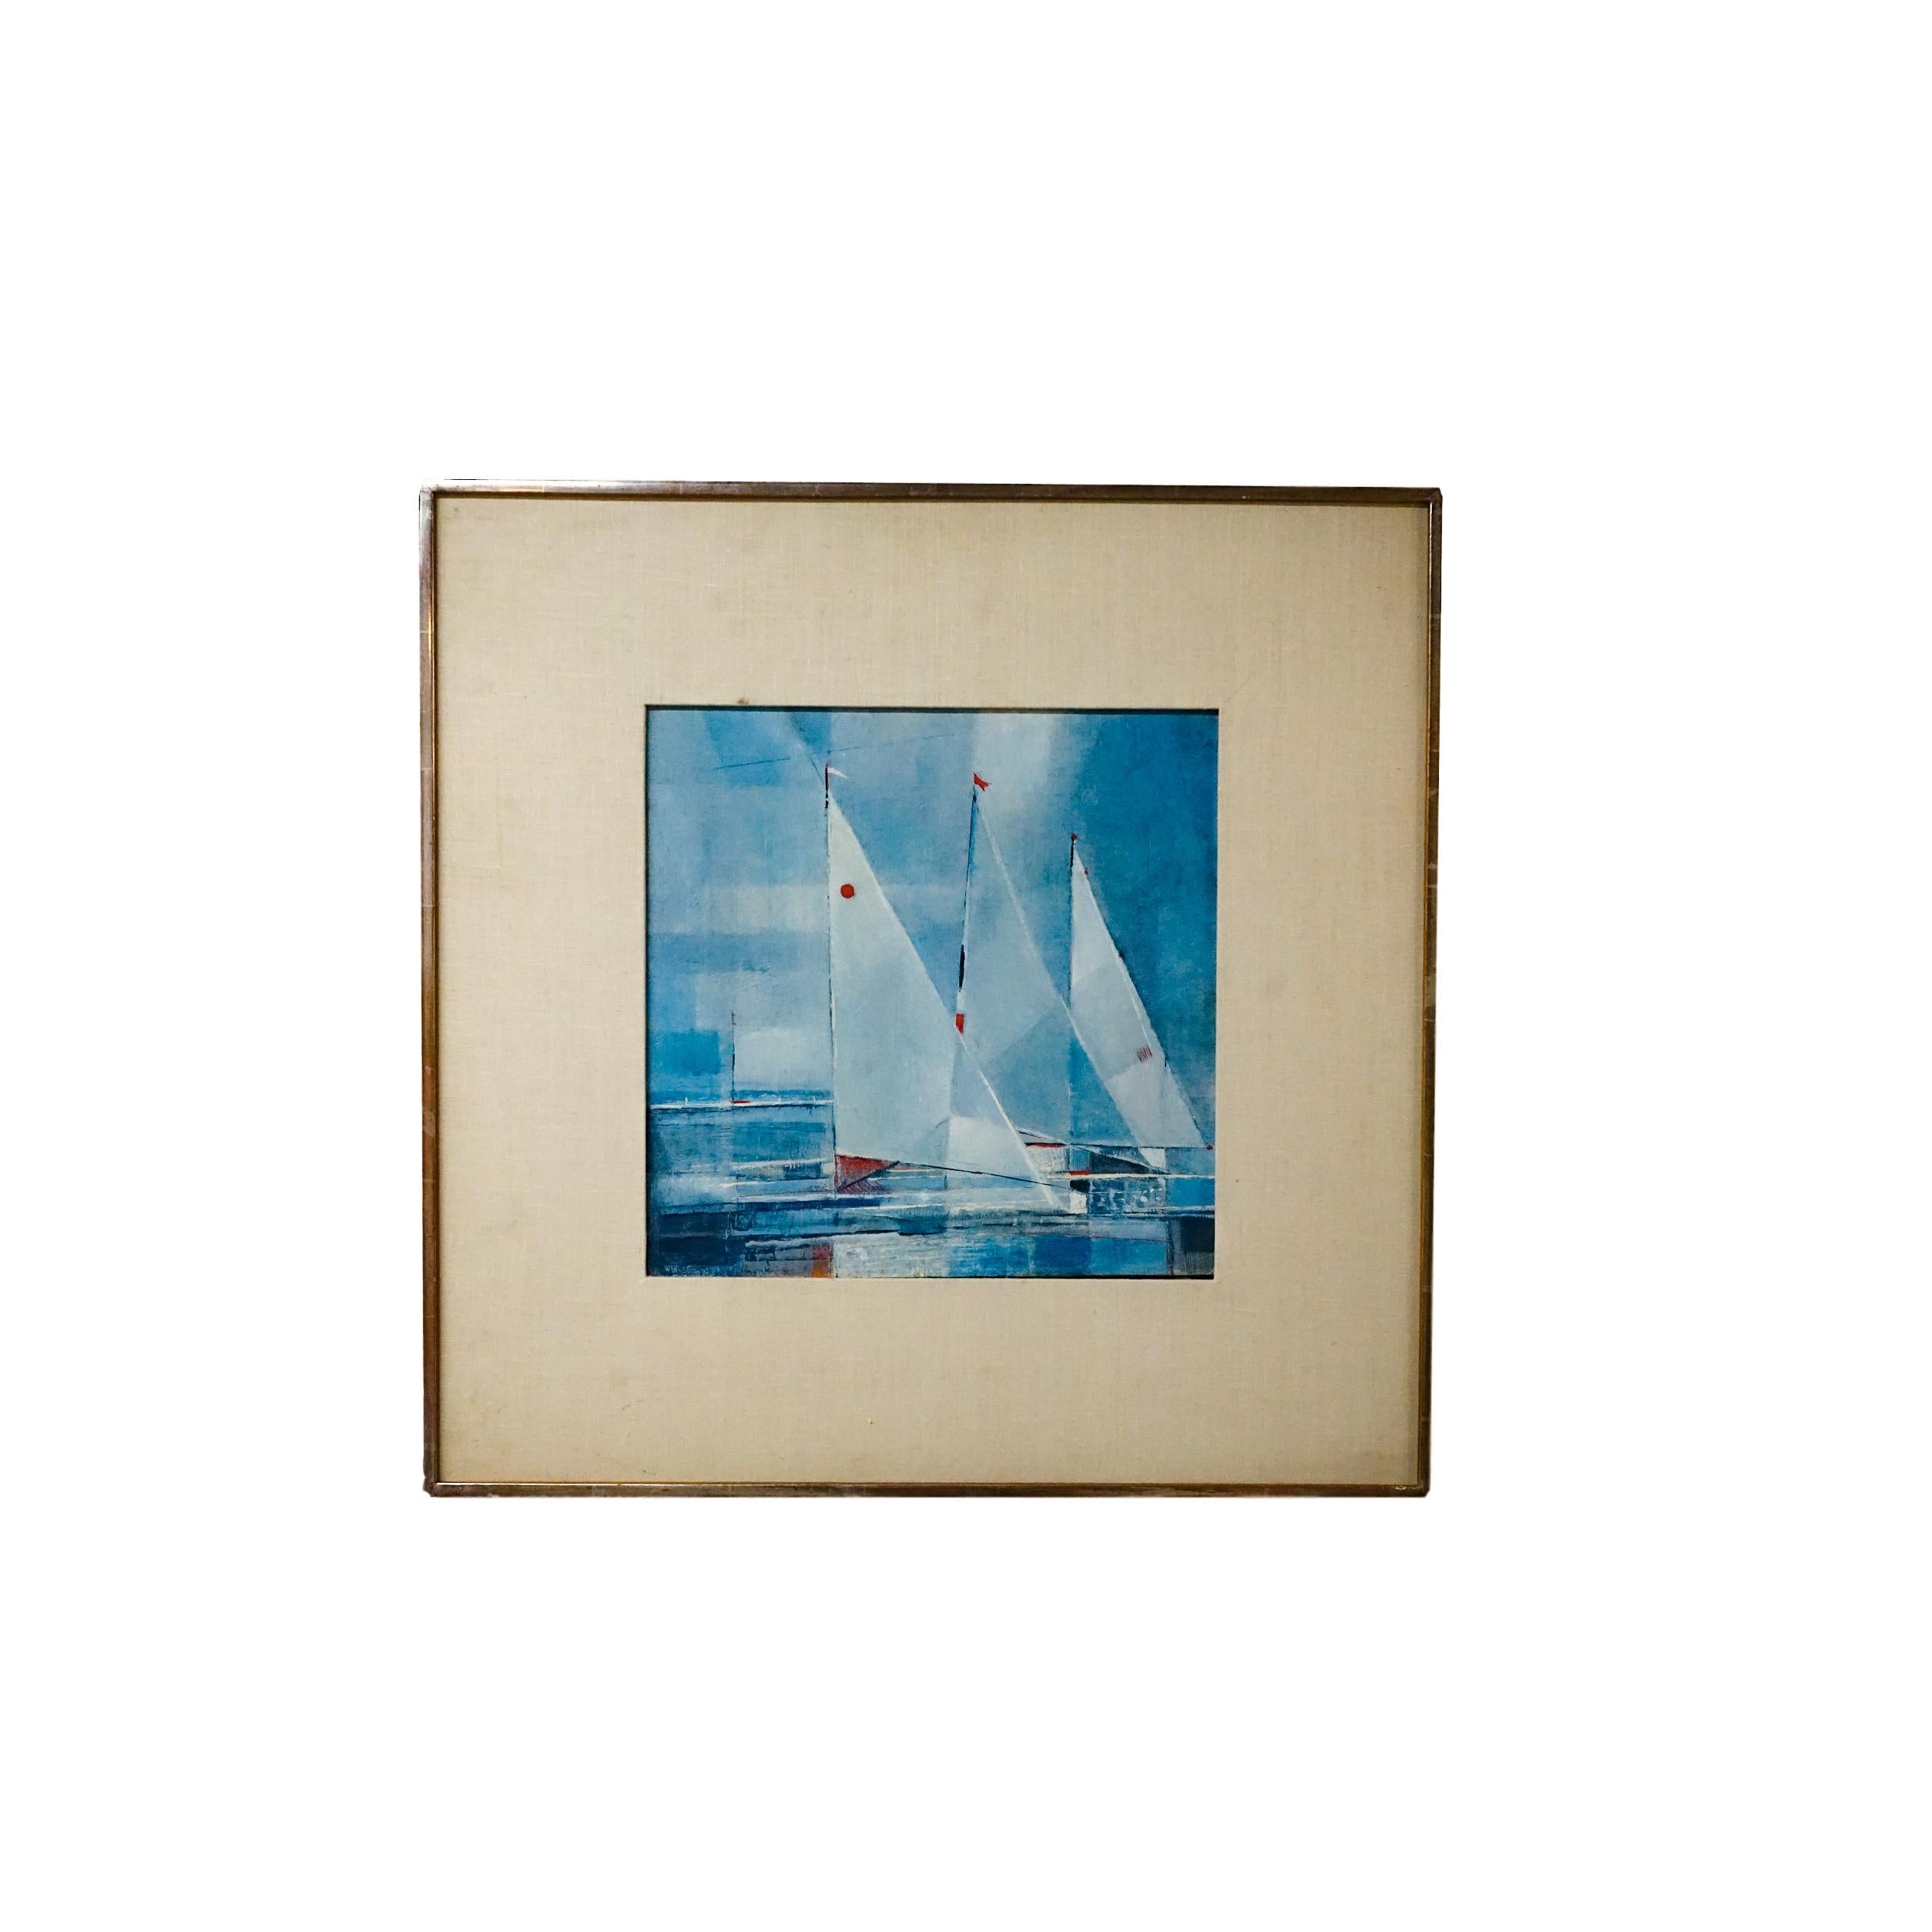 William Charles Palmer Landscape Painting - 1953 American Geometric Abstract Yachts Racing 